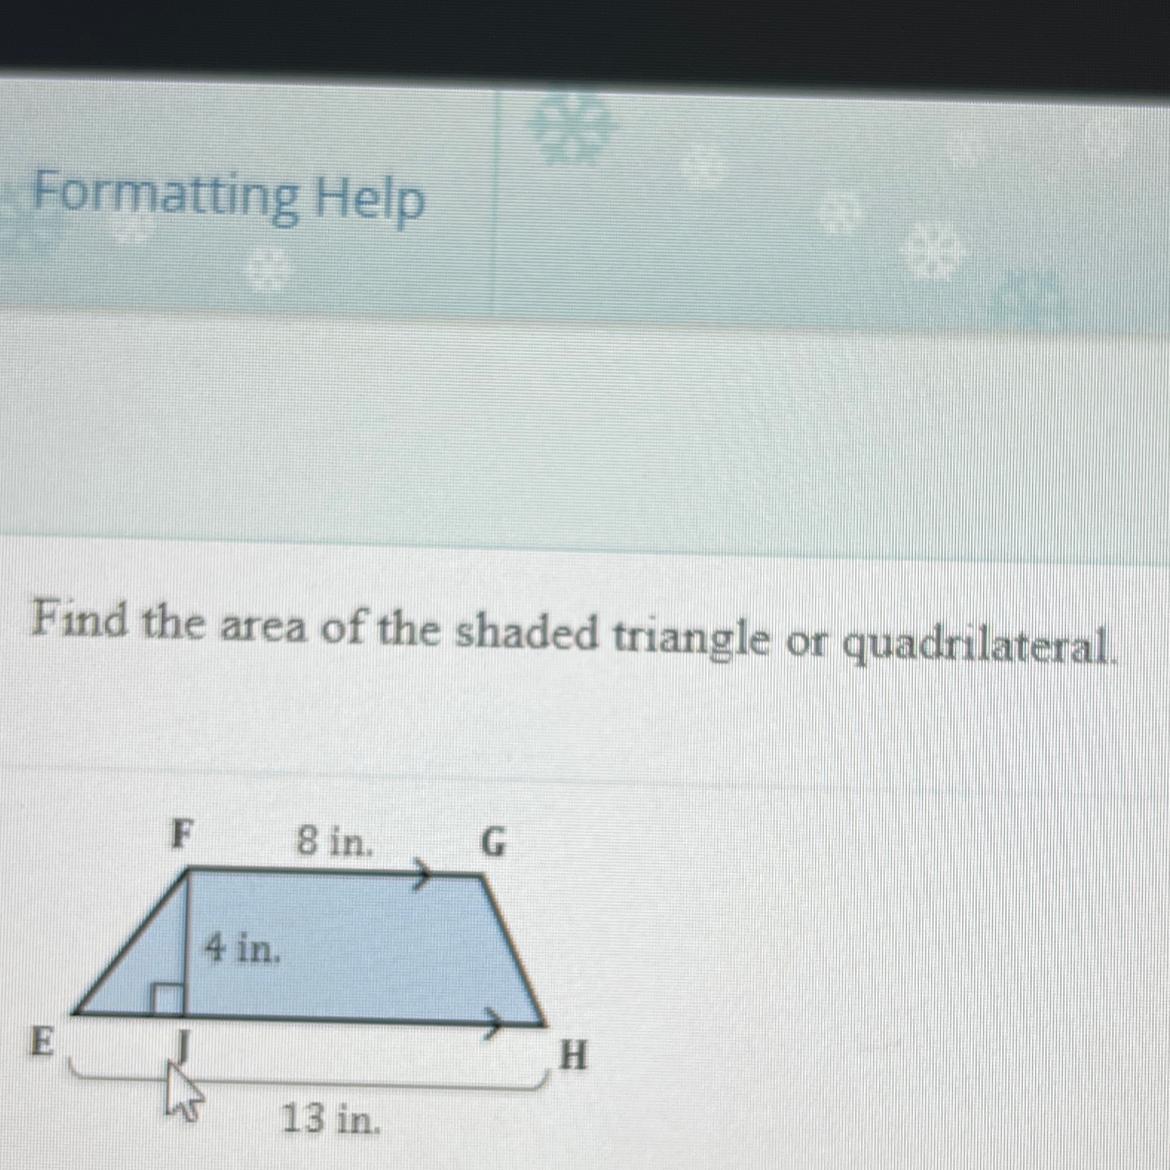 Can Some One Help With This Problem 